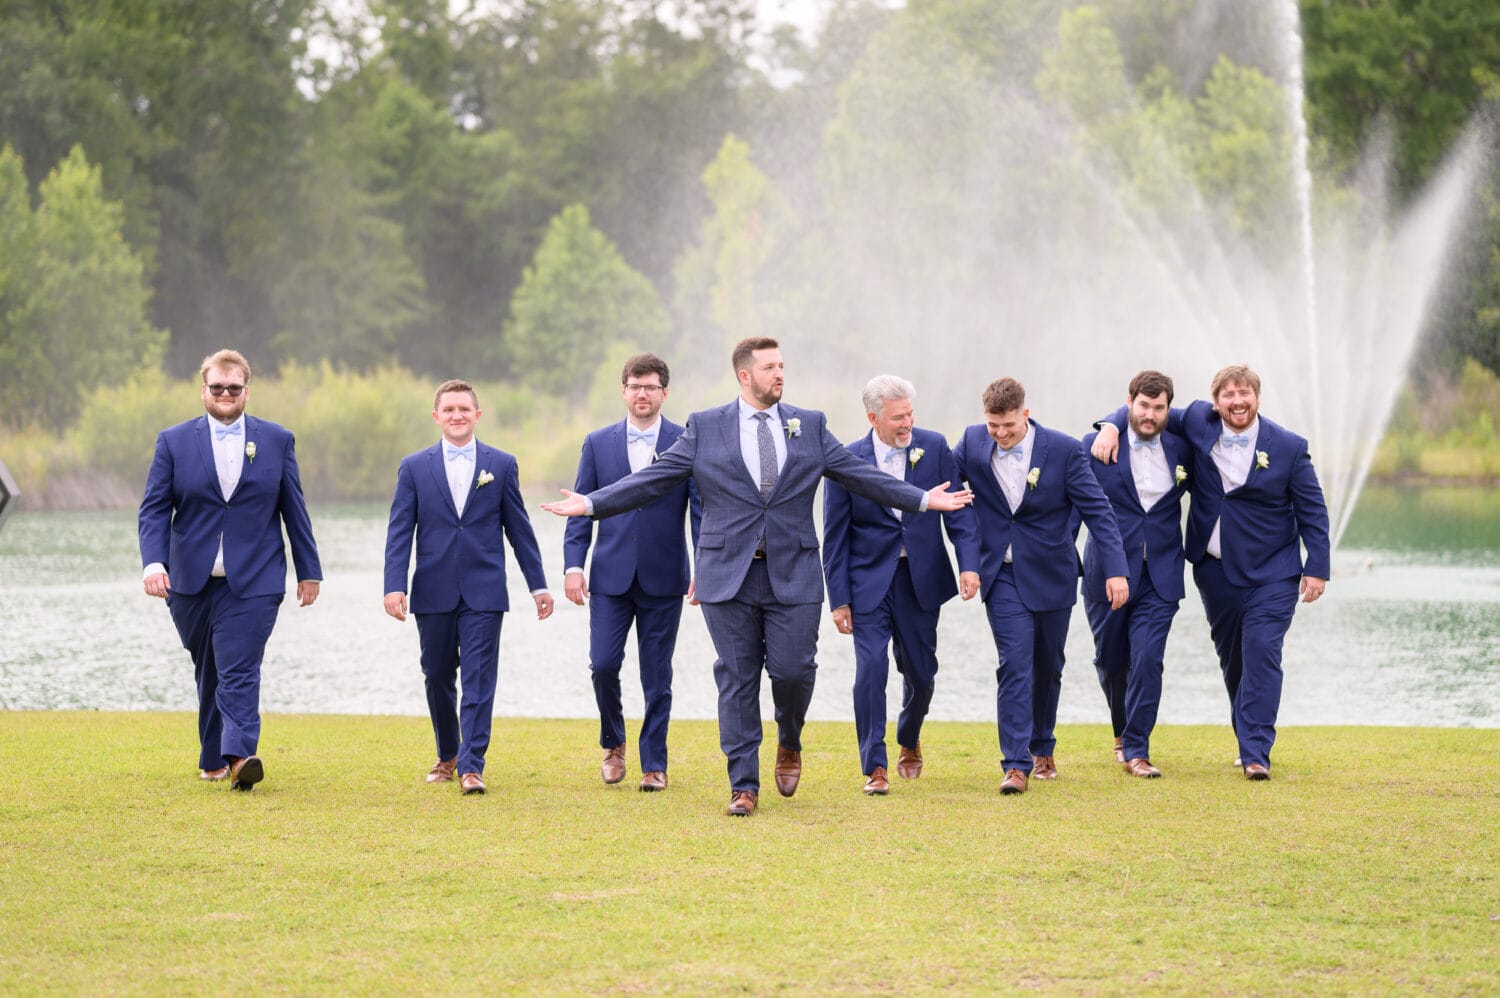 Pictures with the groom and groomsmen before the ceremony - The Venue at White Oaks Farm